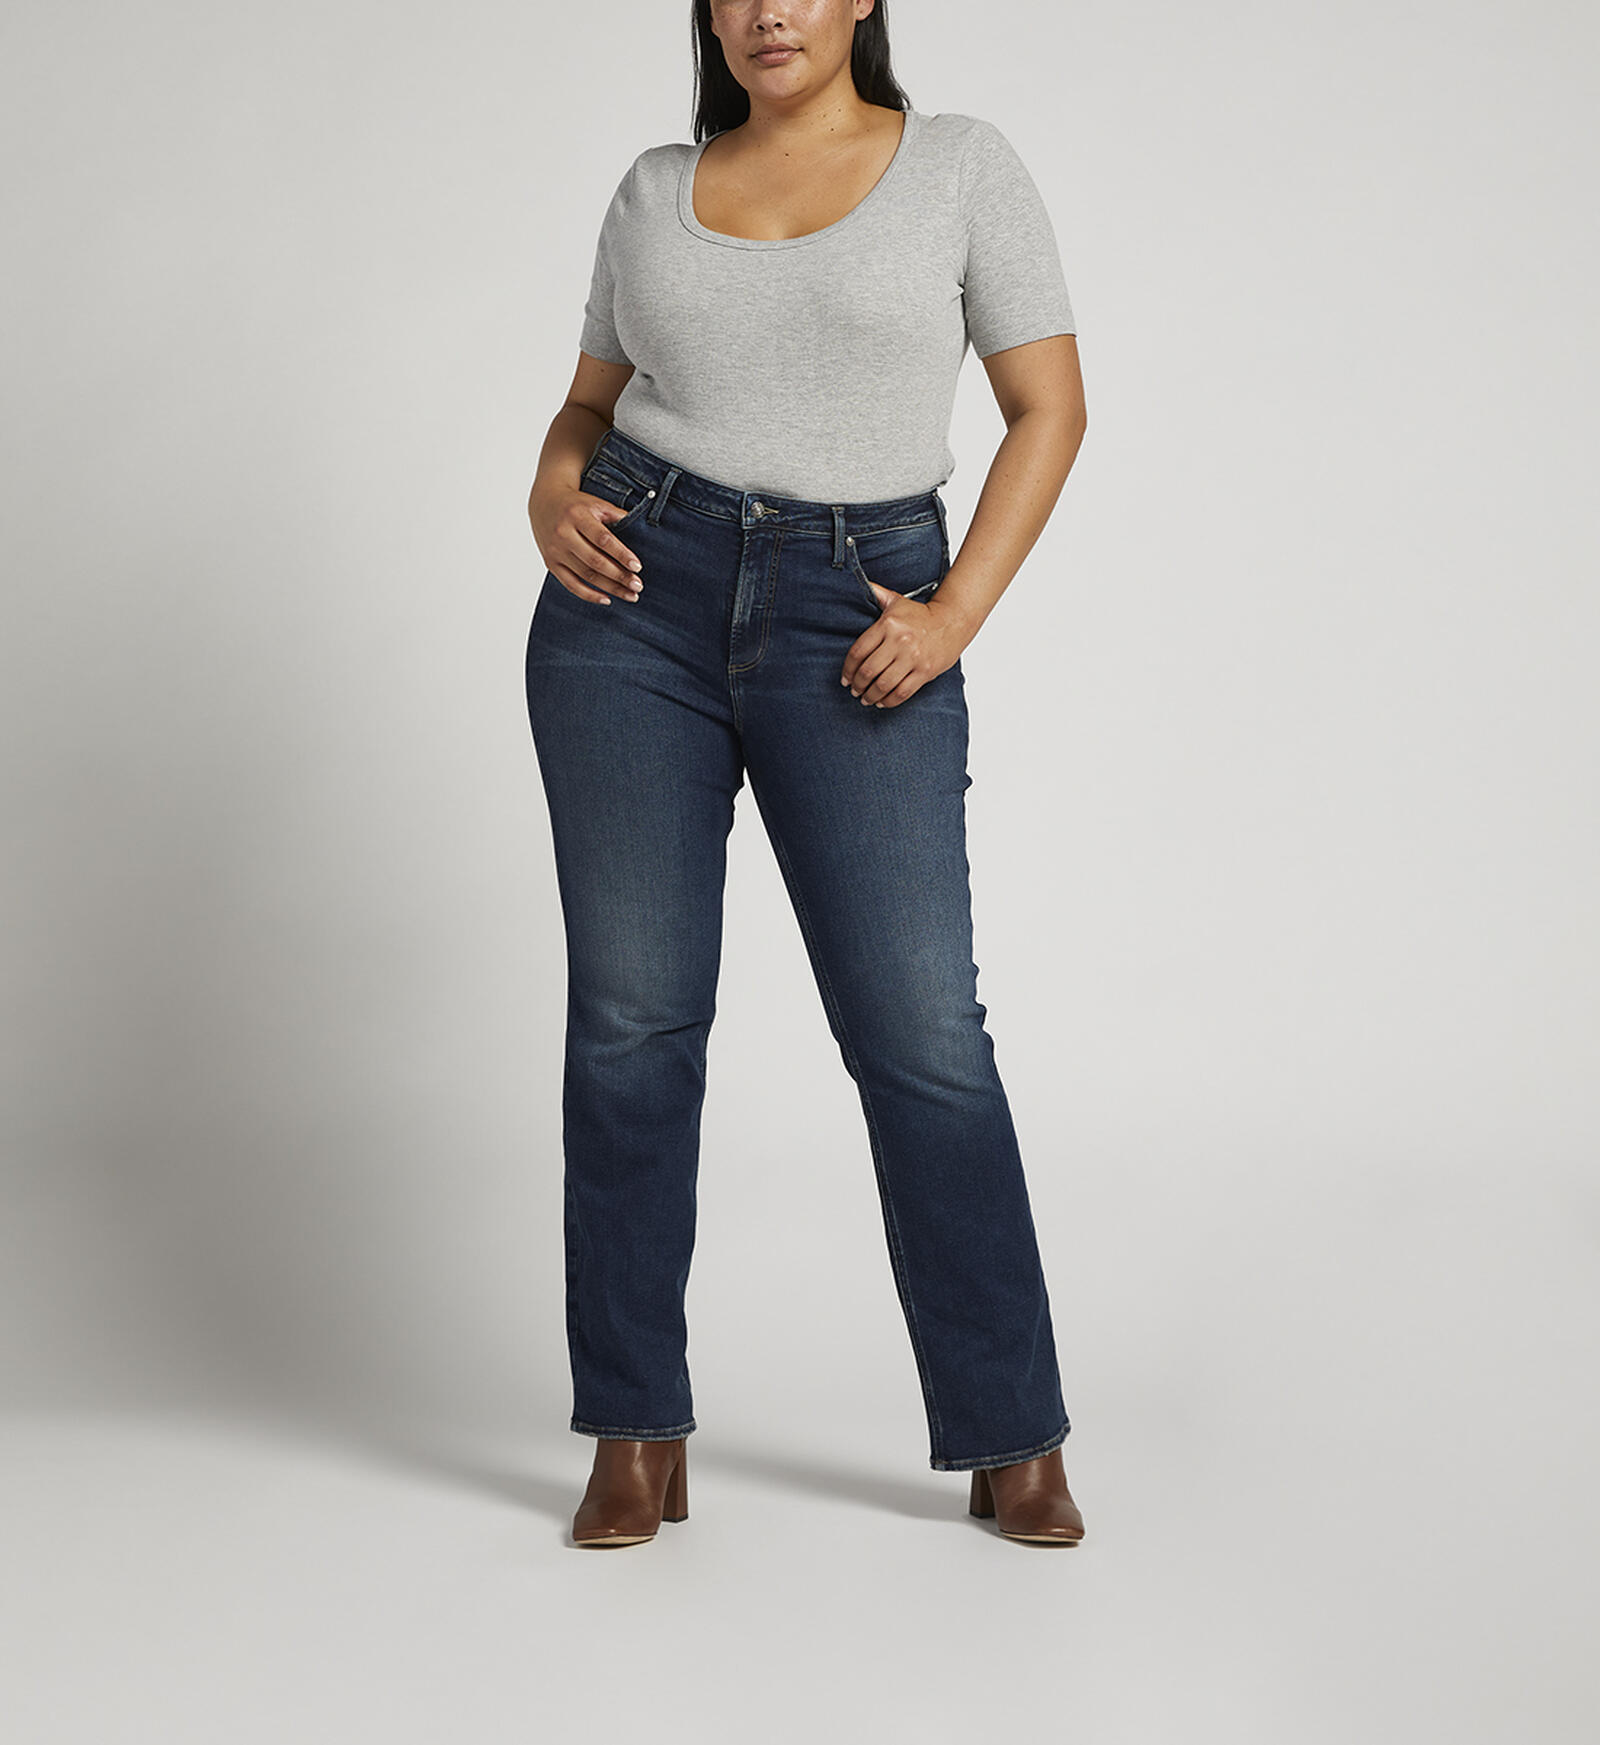 Buy Infinite Fit High Rise Bootcut Jeans Plus Size for USD 68.00 | Silver  Jeans US New